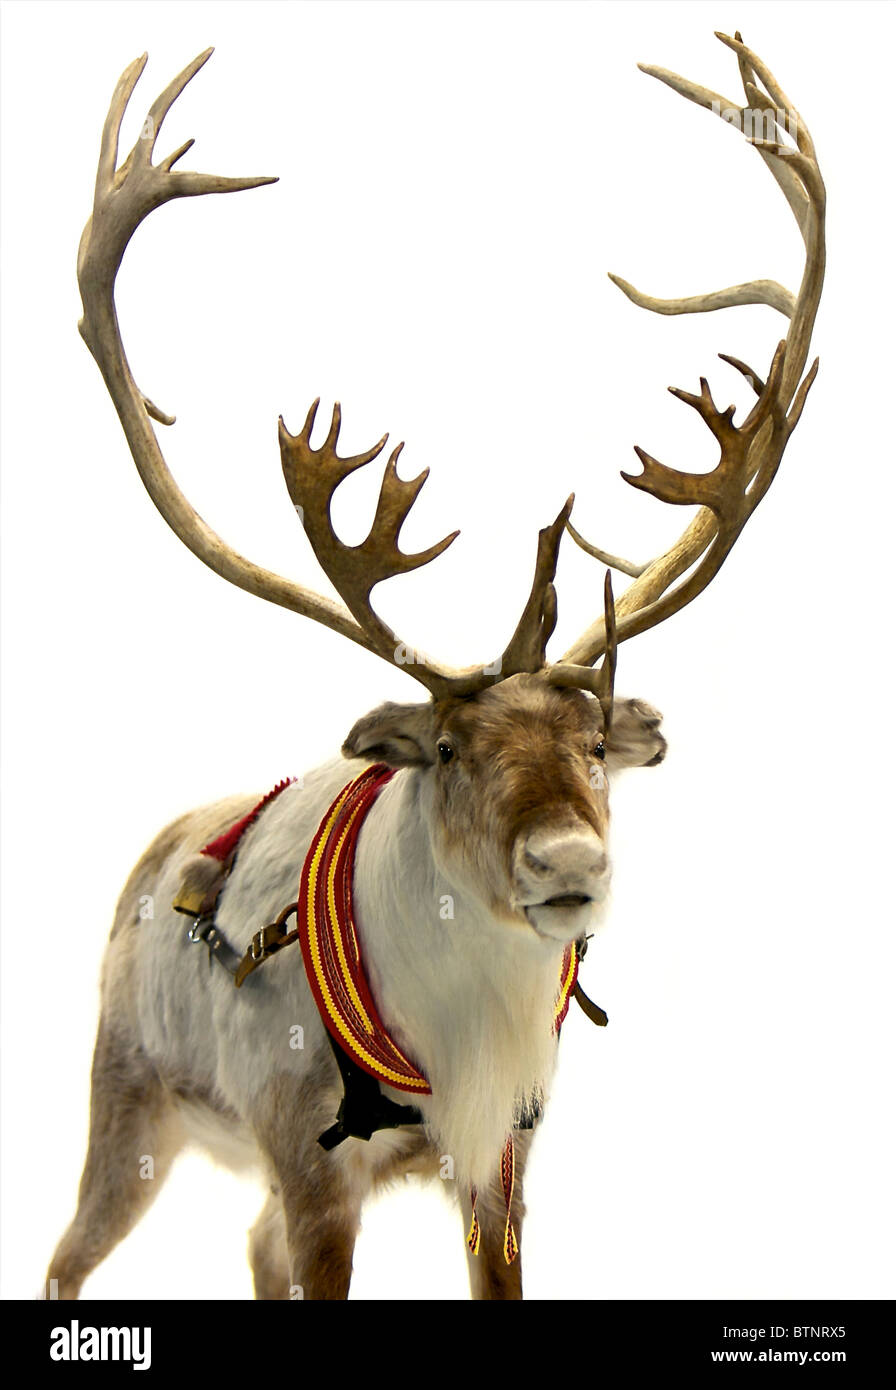 Finnish reindeer wearing traditional harness. Isolated on white background Stock Photo